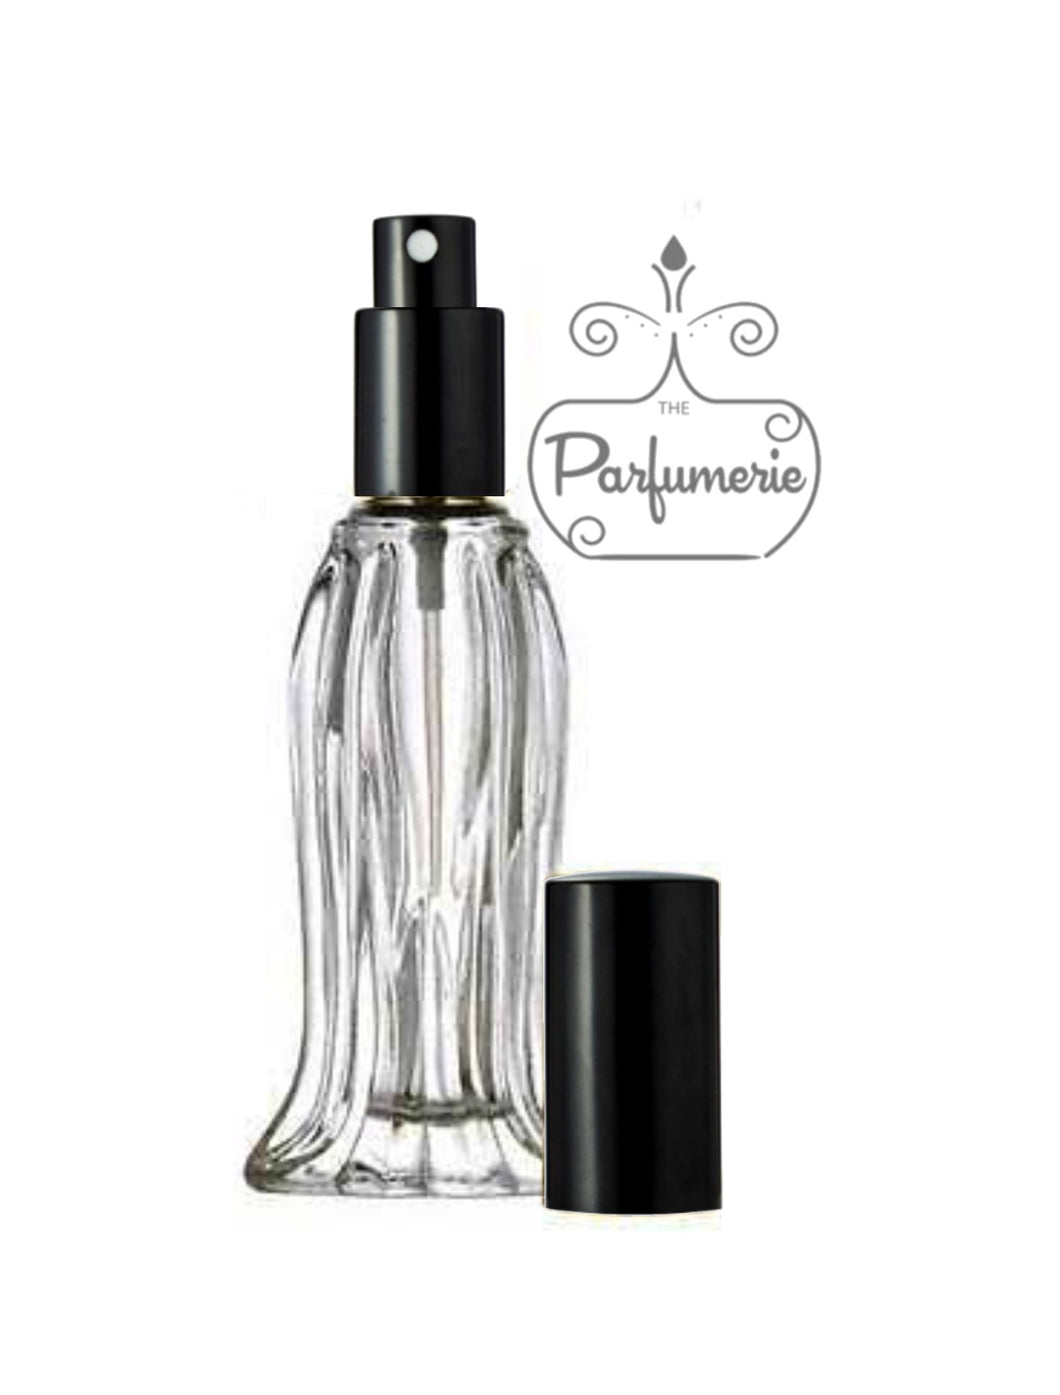 o.6 oz. Tulip Style Glass Perfume Bottle. Spray Bottle with Sprayer top in Black with matching over cap. Atomizer Bottles perfect for Perfume Oils, Essential Oils, Fragrance Oils and Room Sprays.